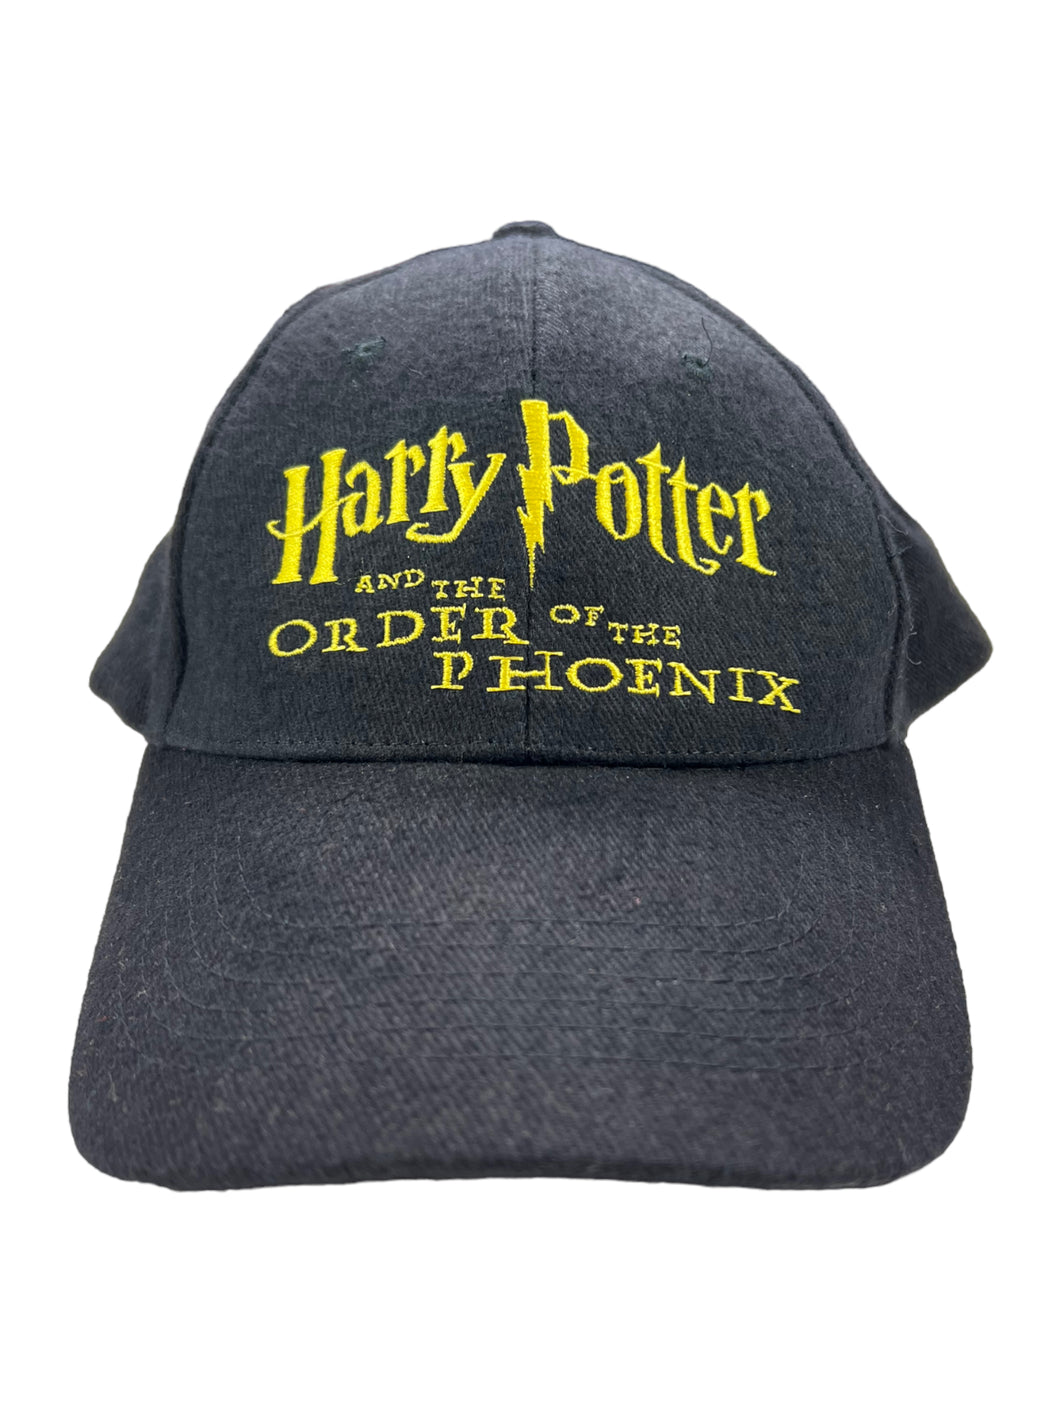 Vintage 2003 Harry Potter and the order of the Phoenix Scholastic book fair StrapBack hat